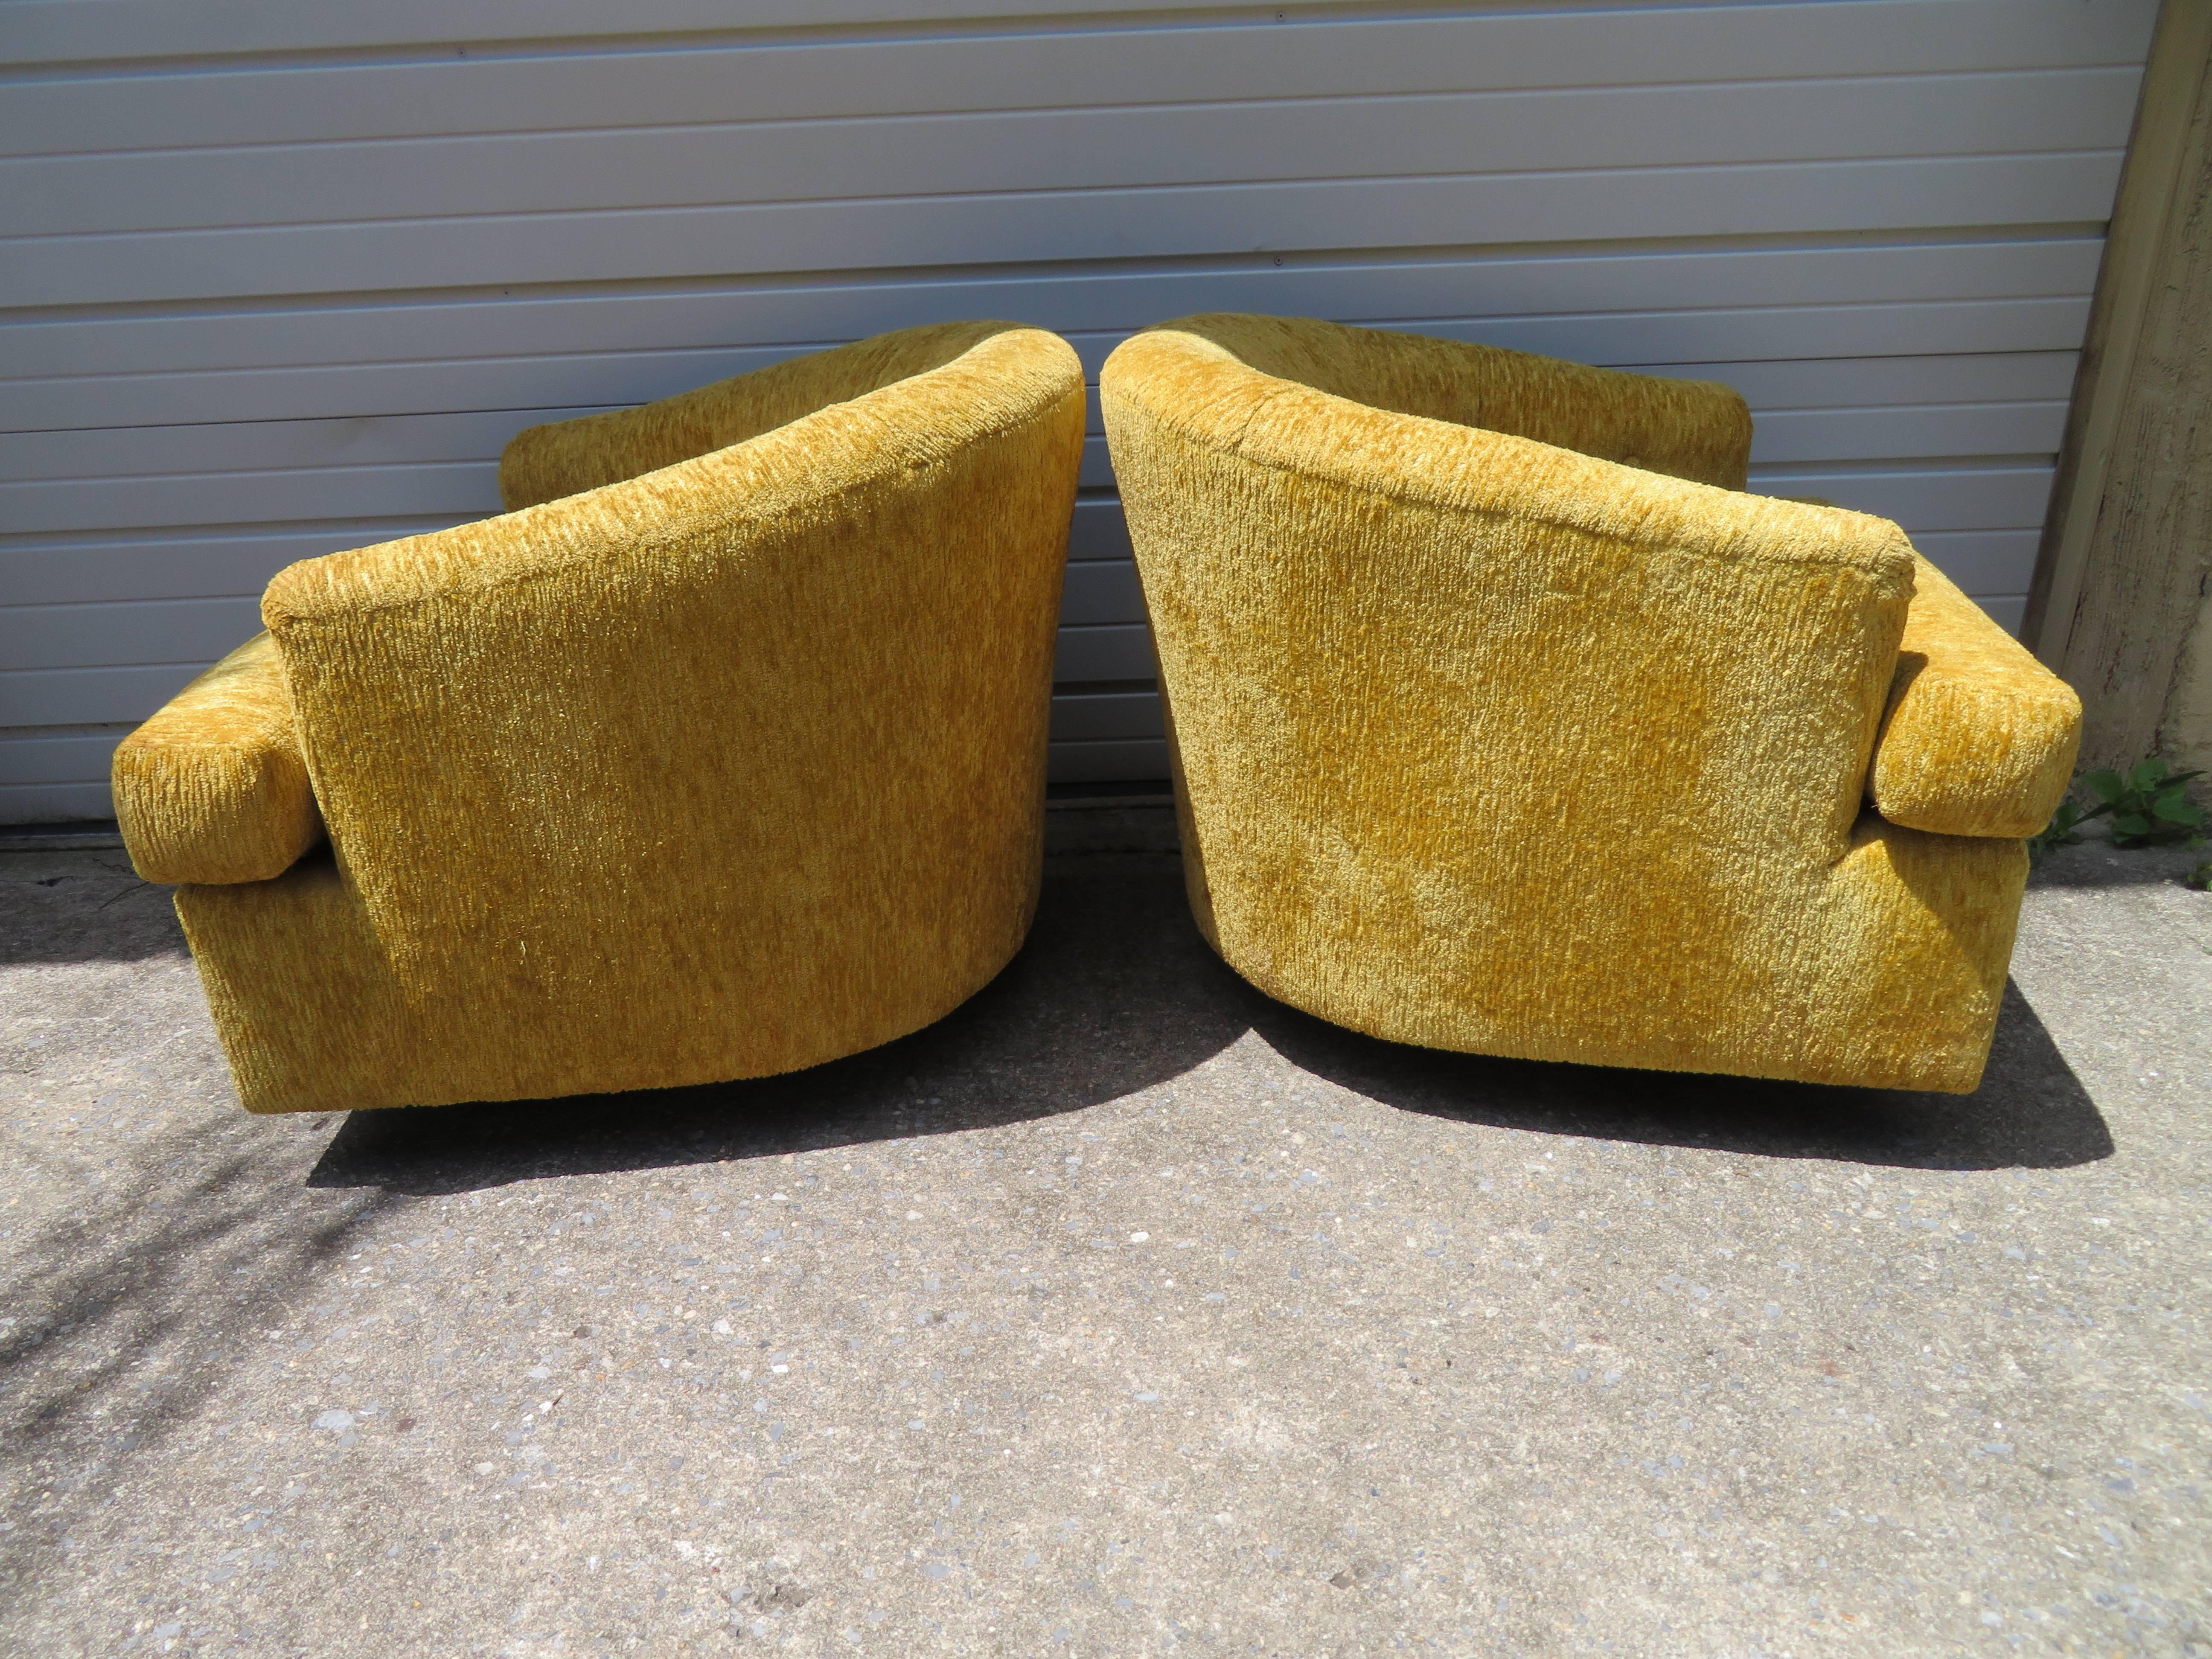 Handsome Pair of John Stuart Swivel Barrel Back Lounge Chairs Mid-Century Modern In Good Condition For Sale In Pemberton, NJ